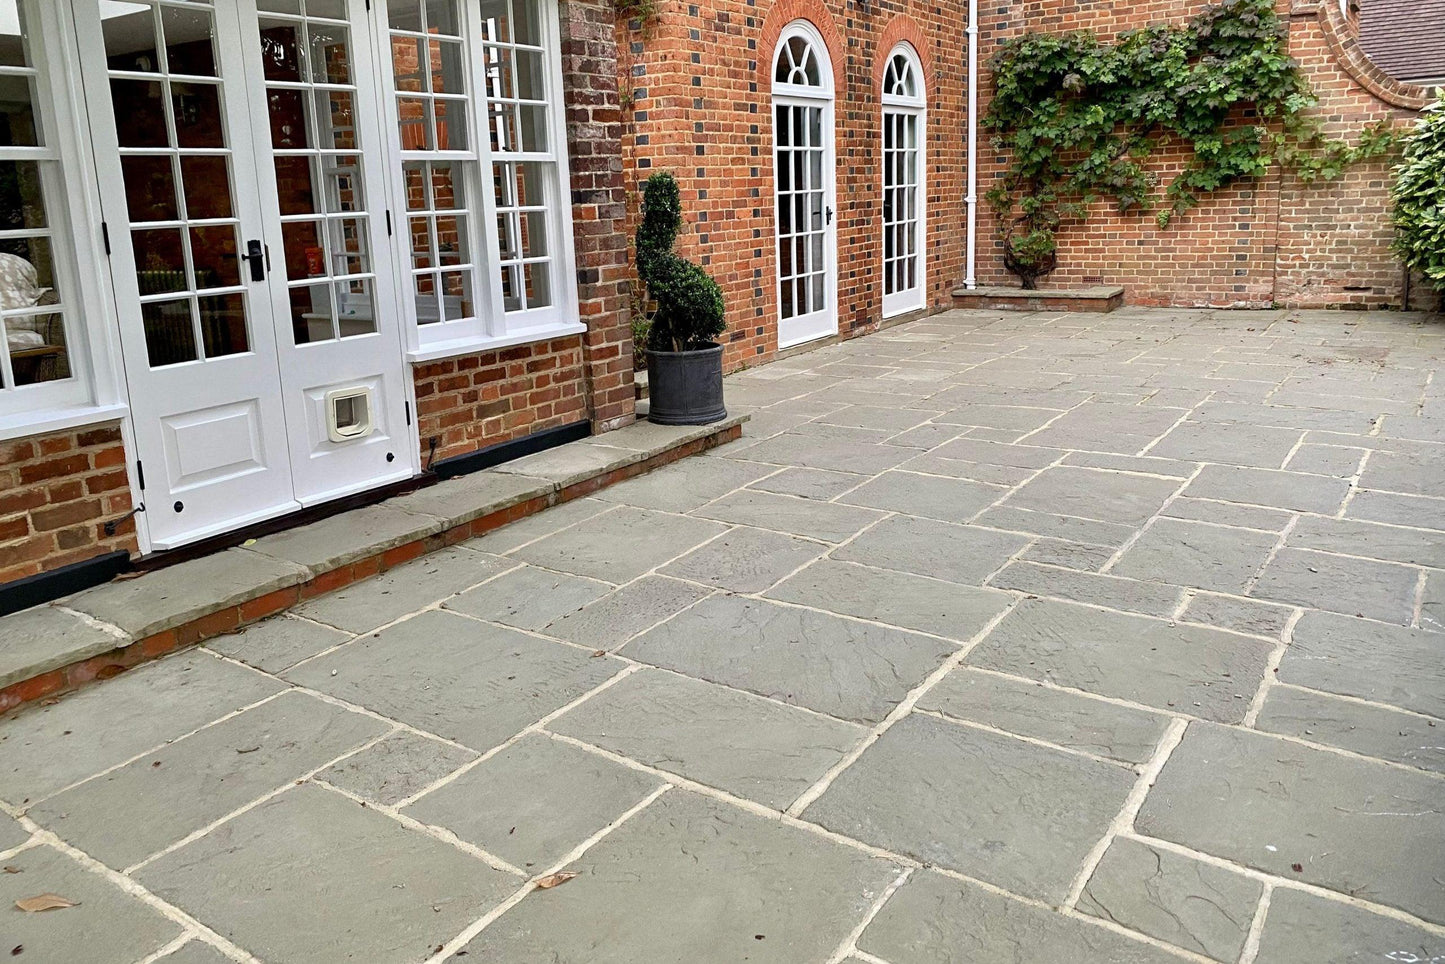 A spacious stone-paved patio adorned with Brisks Kandla Grey Sandstone Paving Slabs, featuring a brick house with large white-framed French doors and arched windows. A small topiary plant in a pot stands near the door, while green ivy climbs part of the wall in the background.